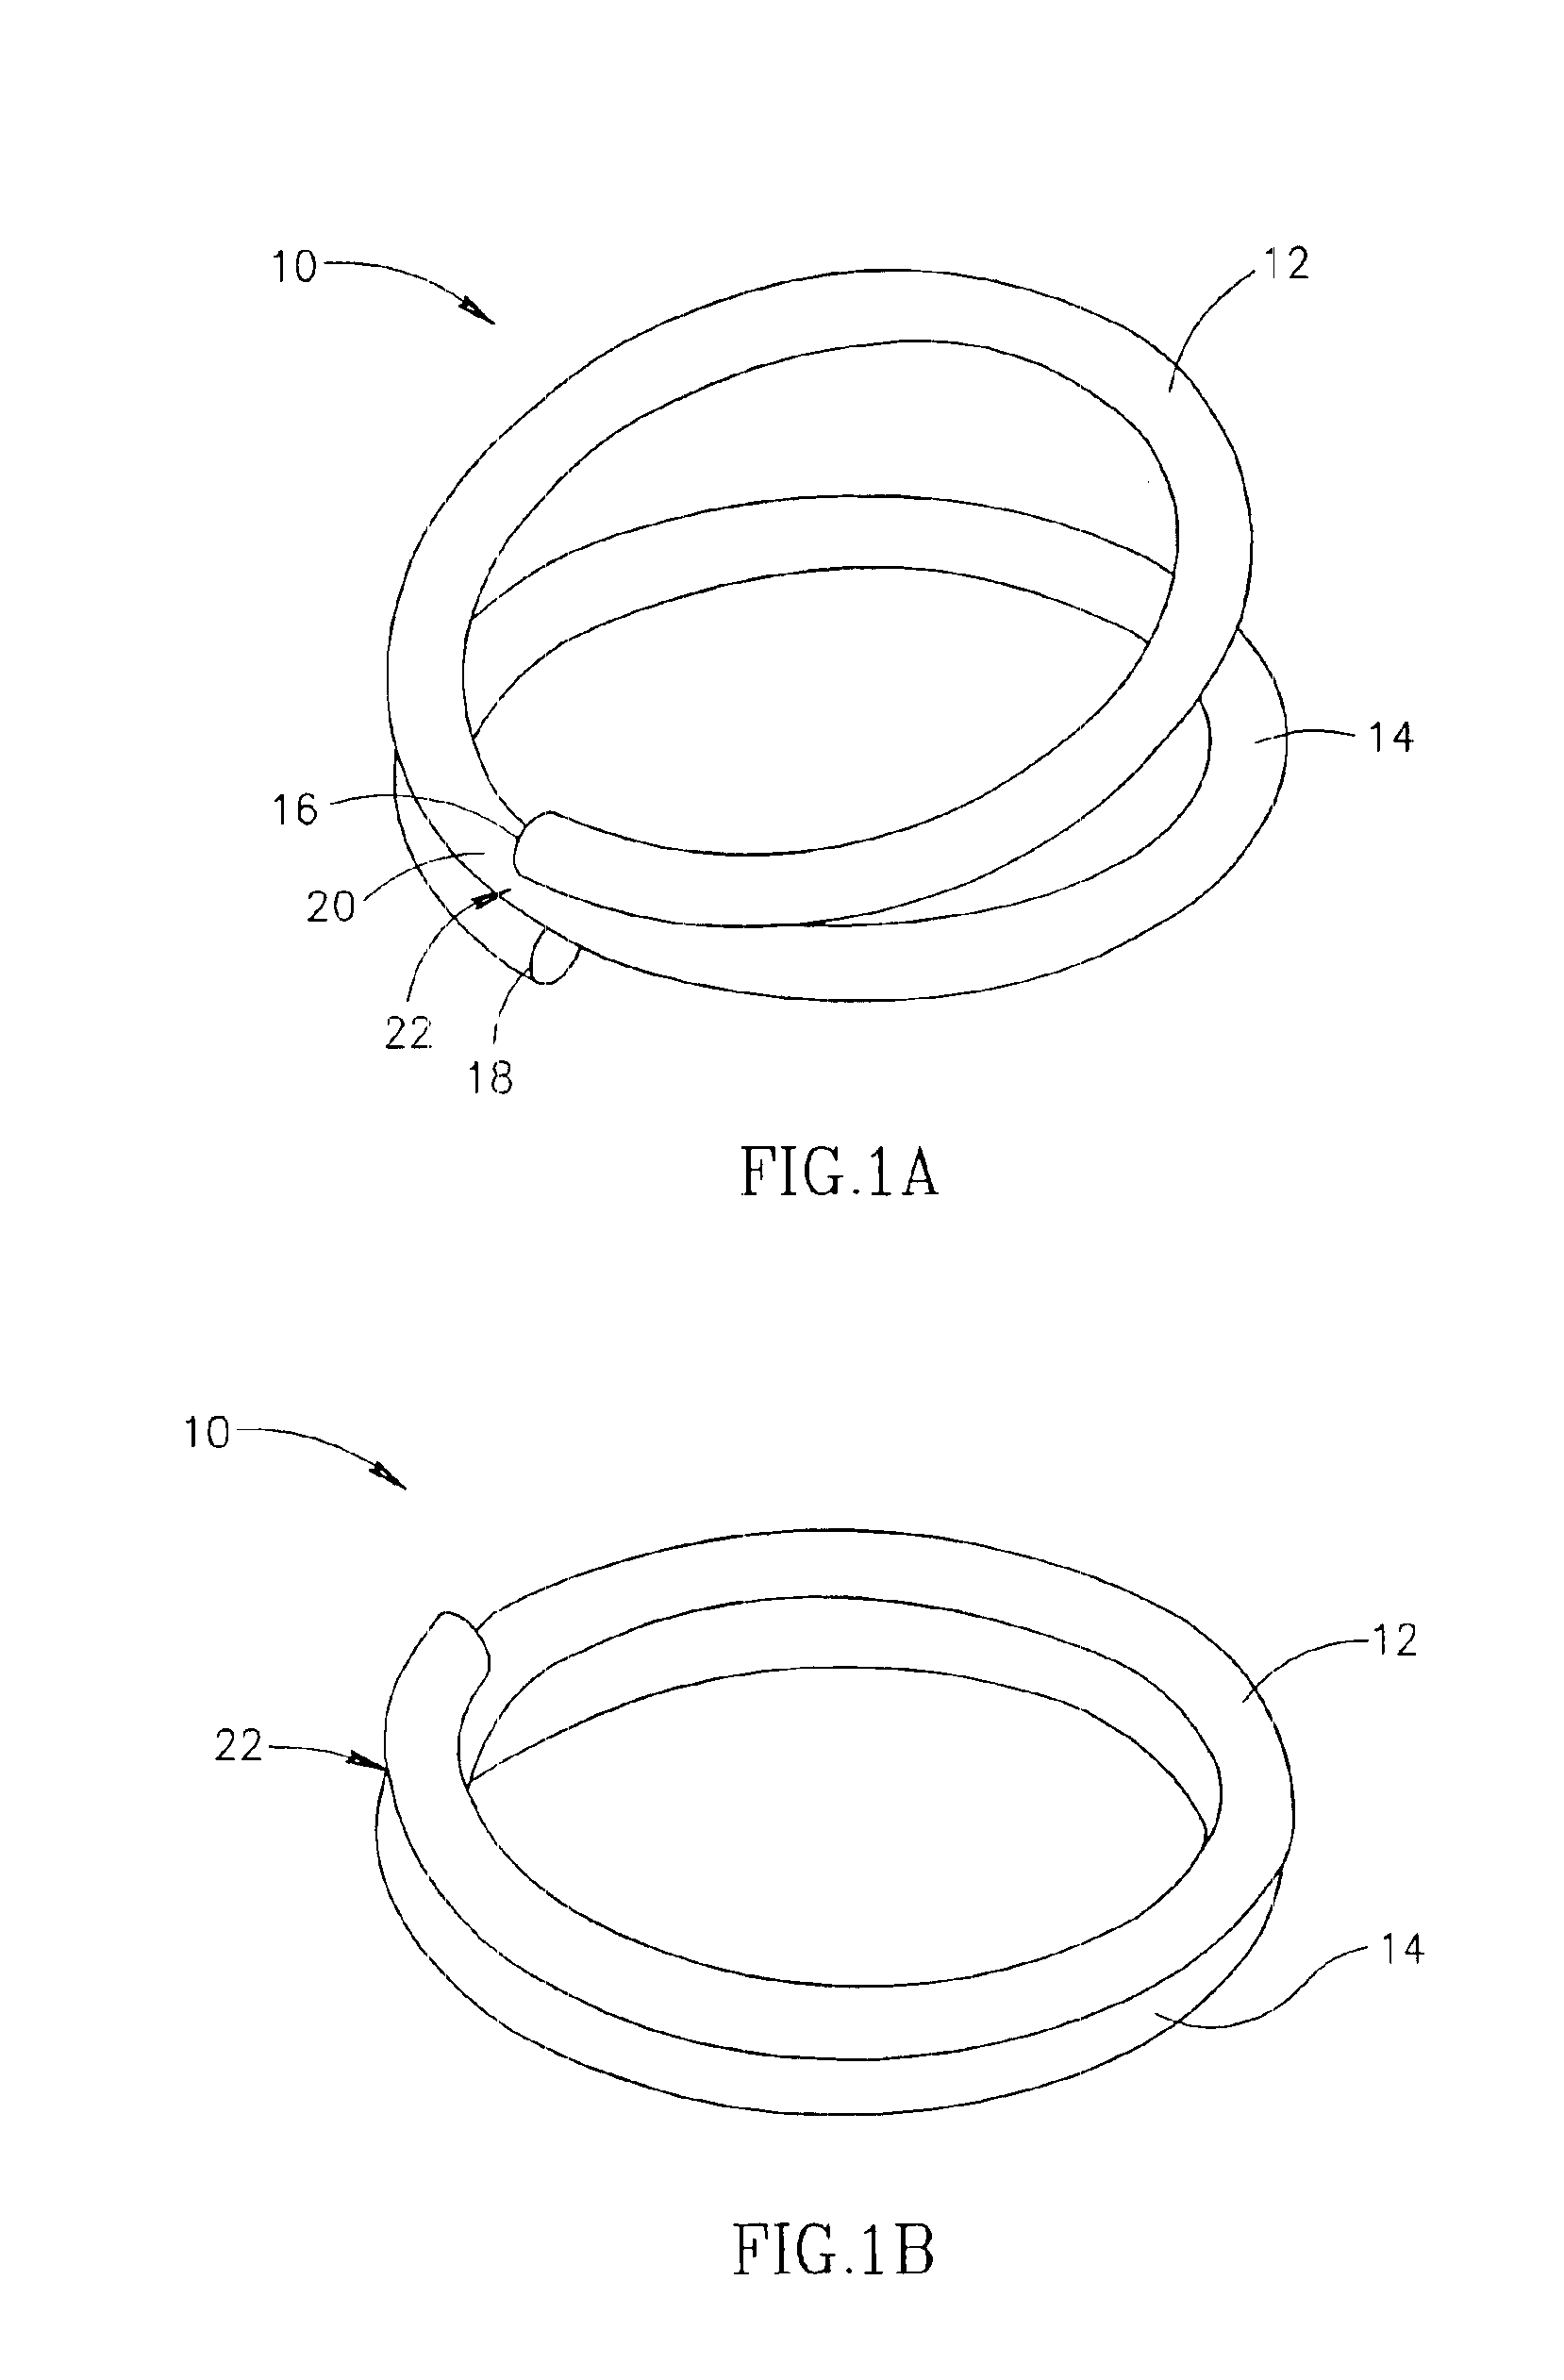 Surgical clip applicator device